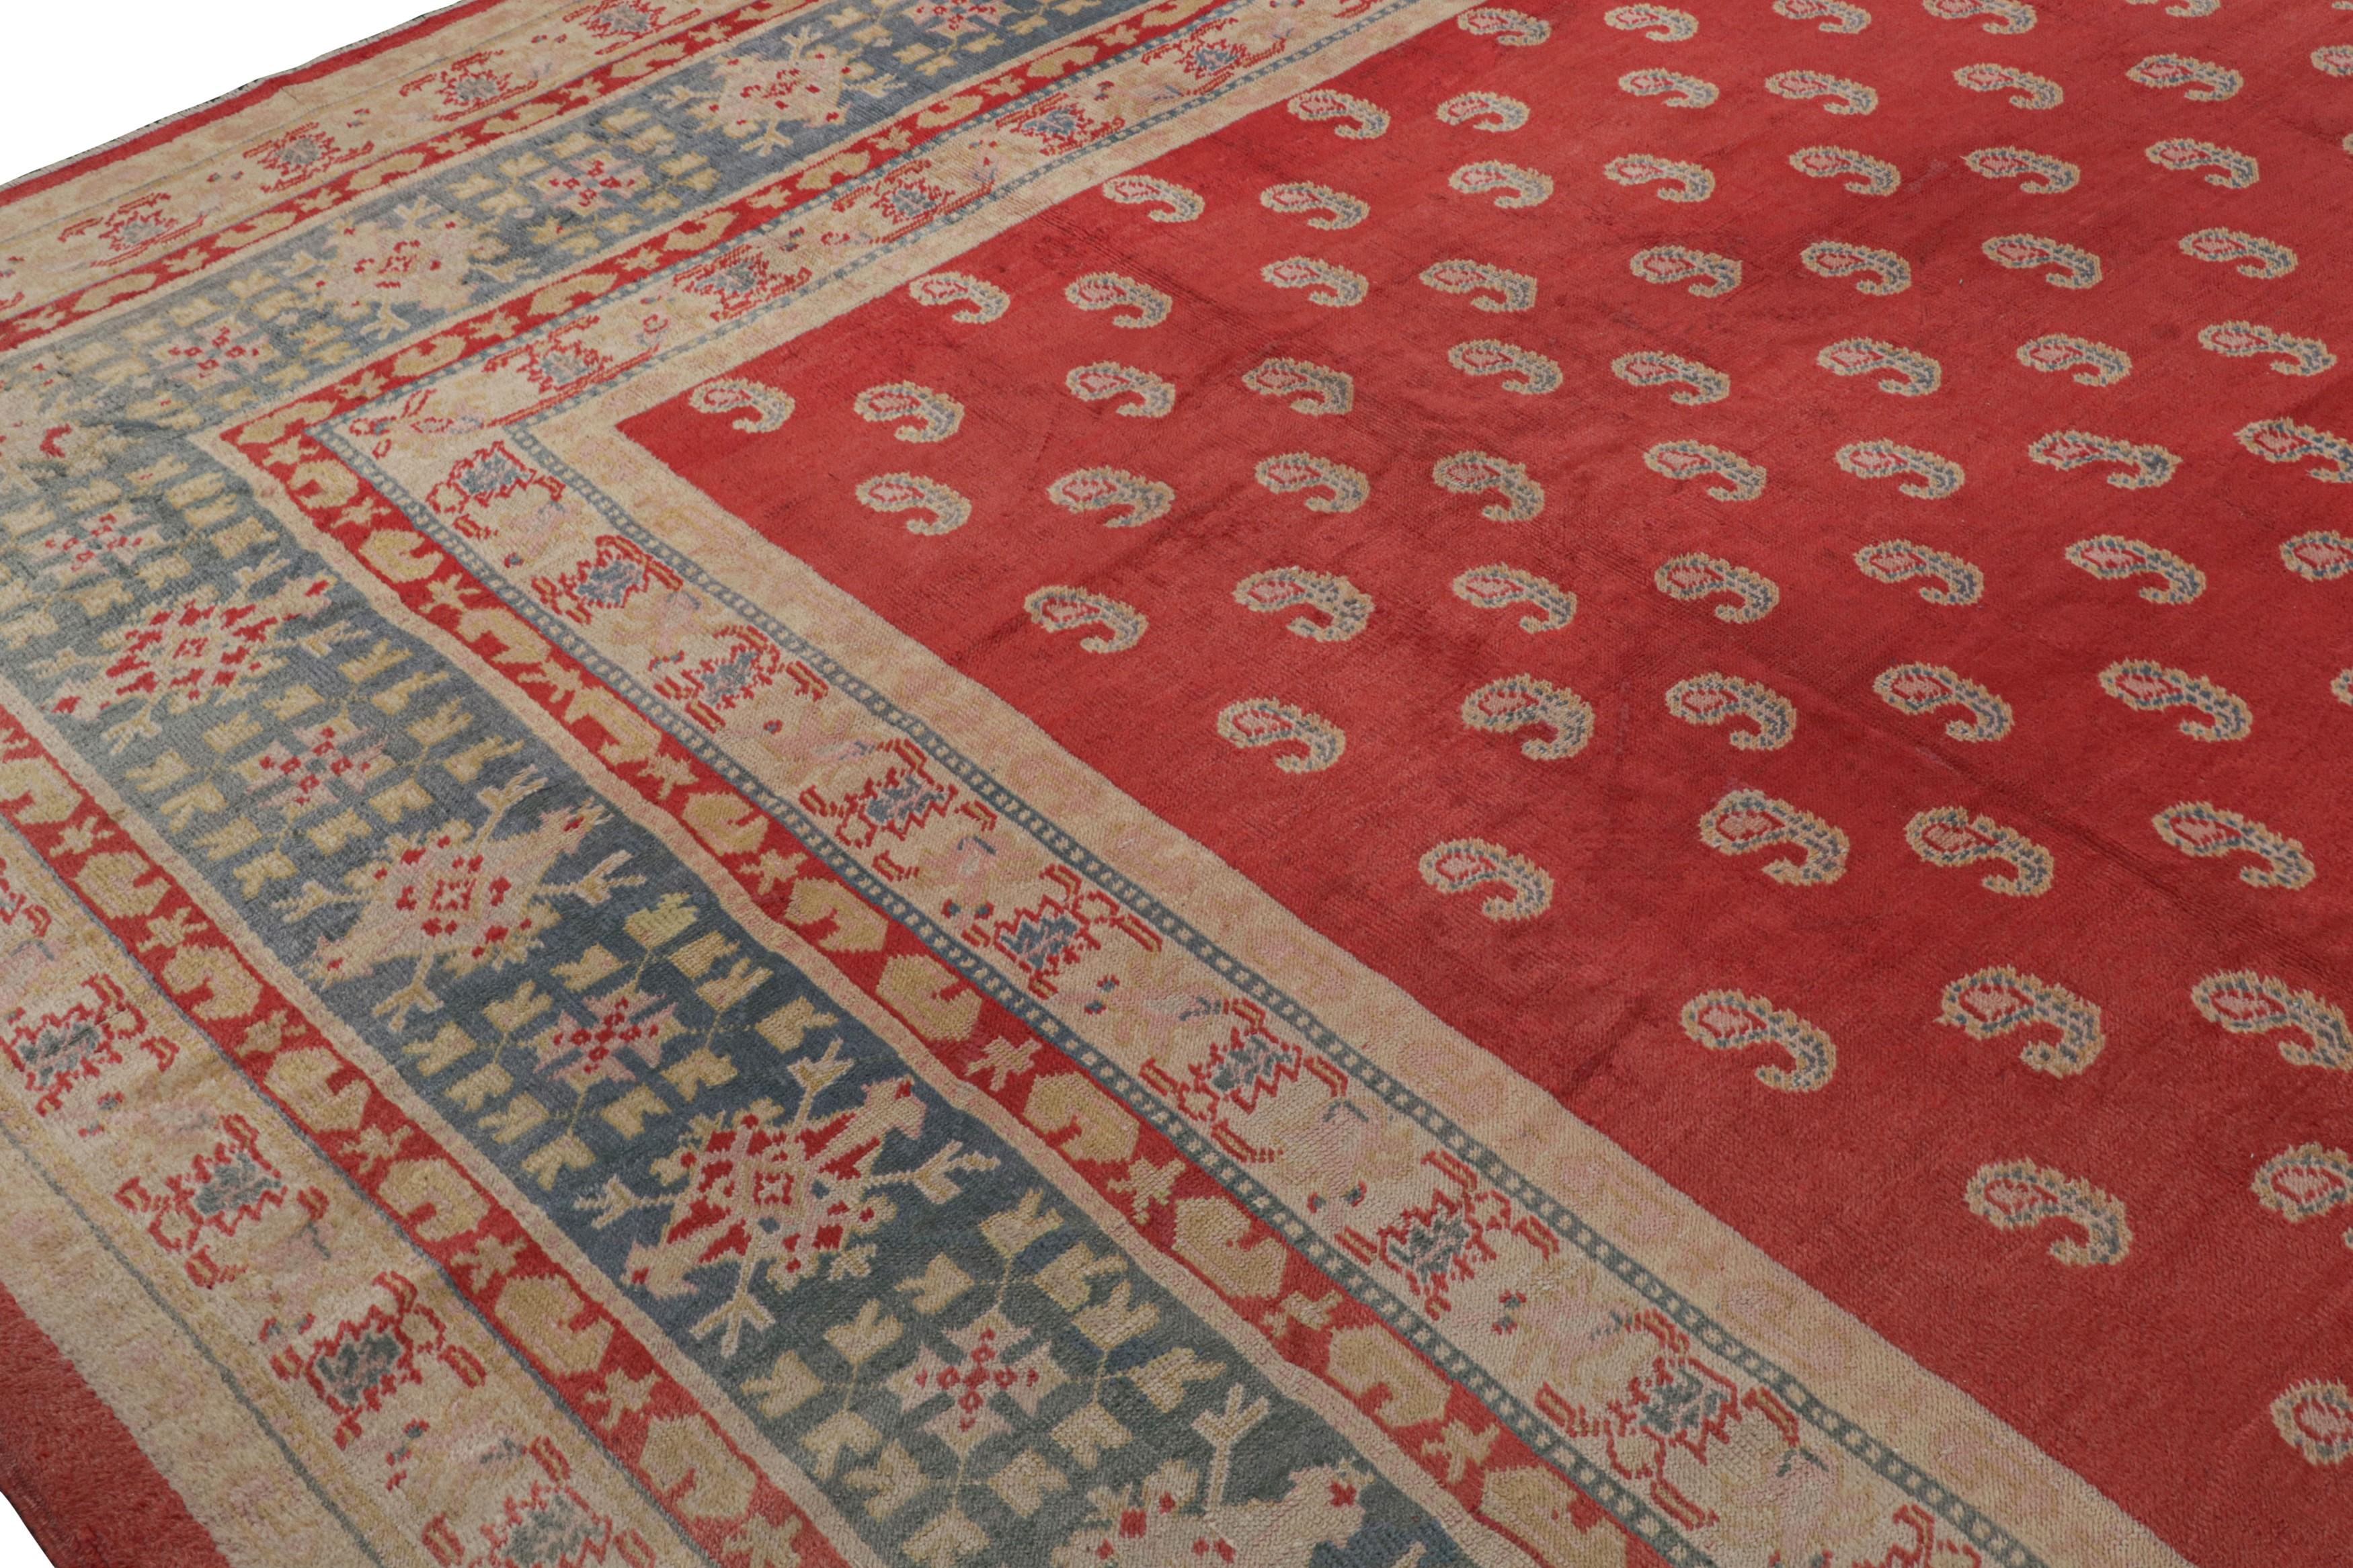 Antique Oushak Rug in Red with Paisley Patterns, from Rug & Kilim In Good Condition For Sale In Long Island City, NY